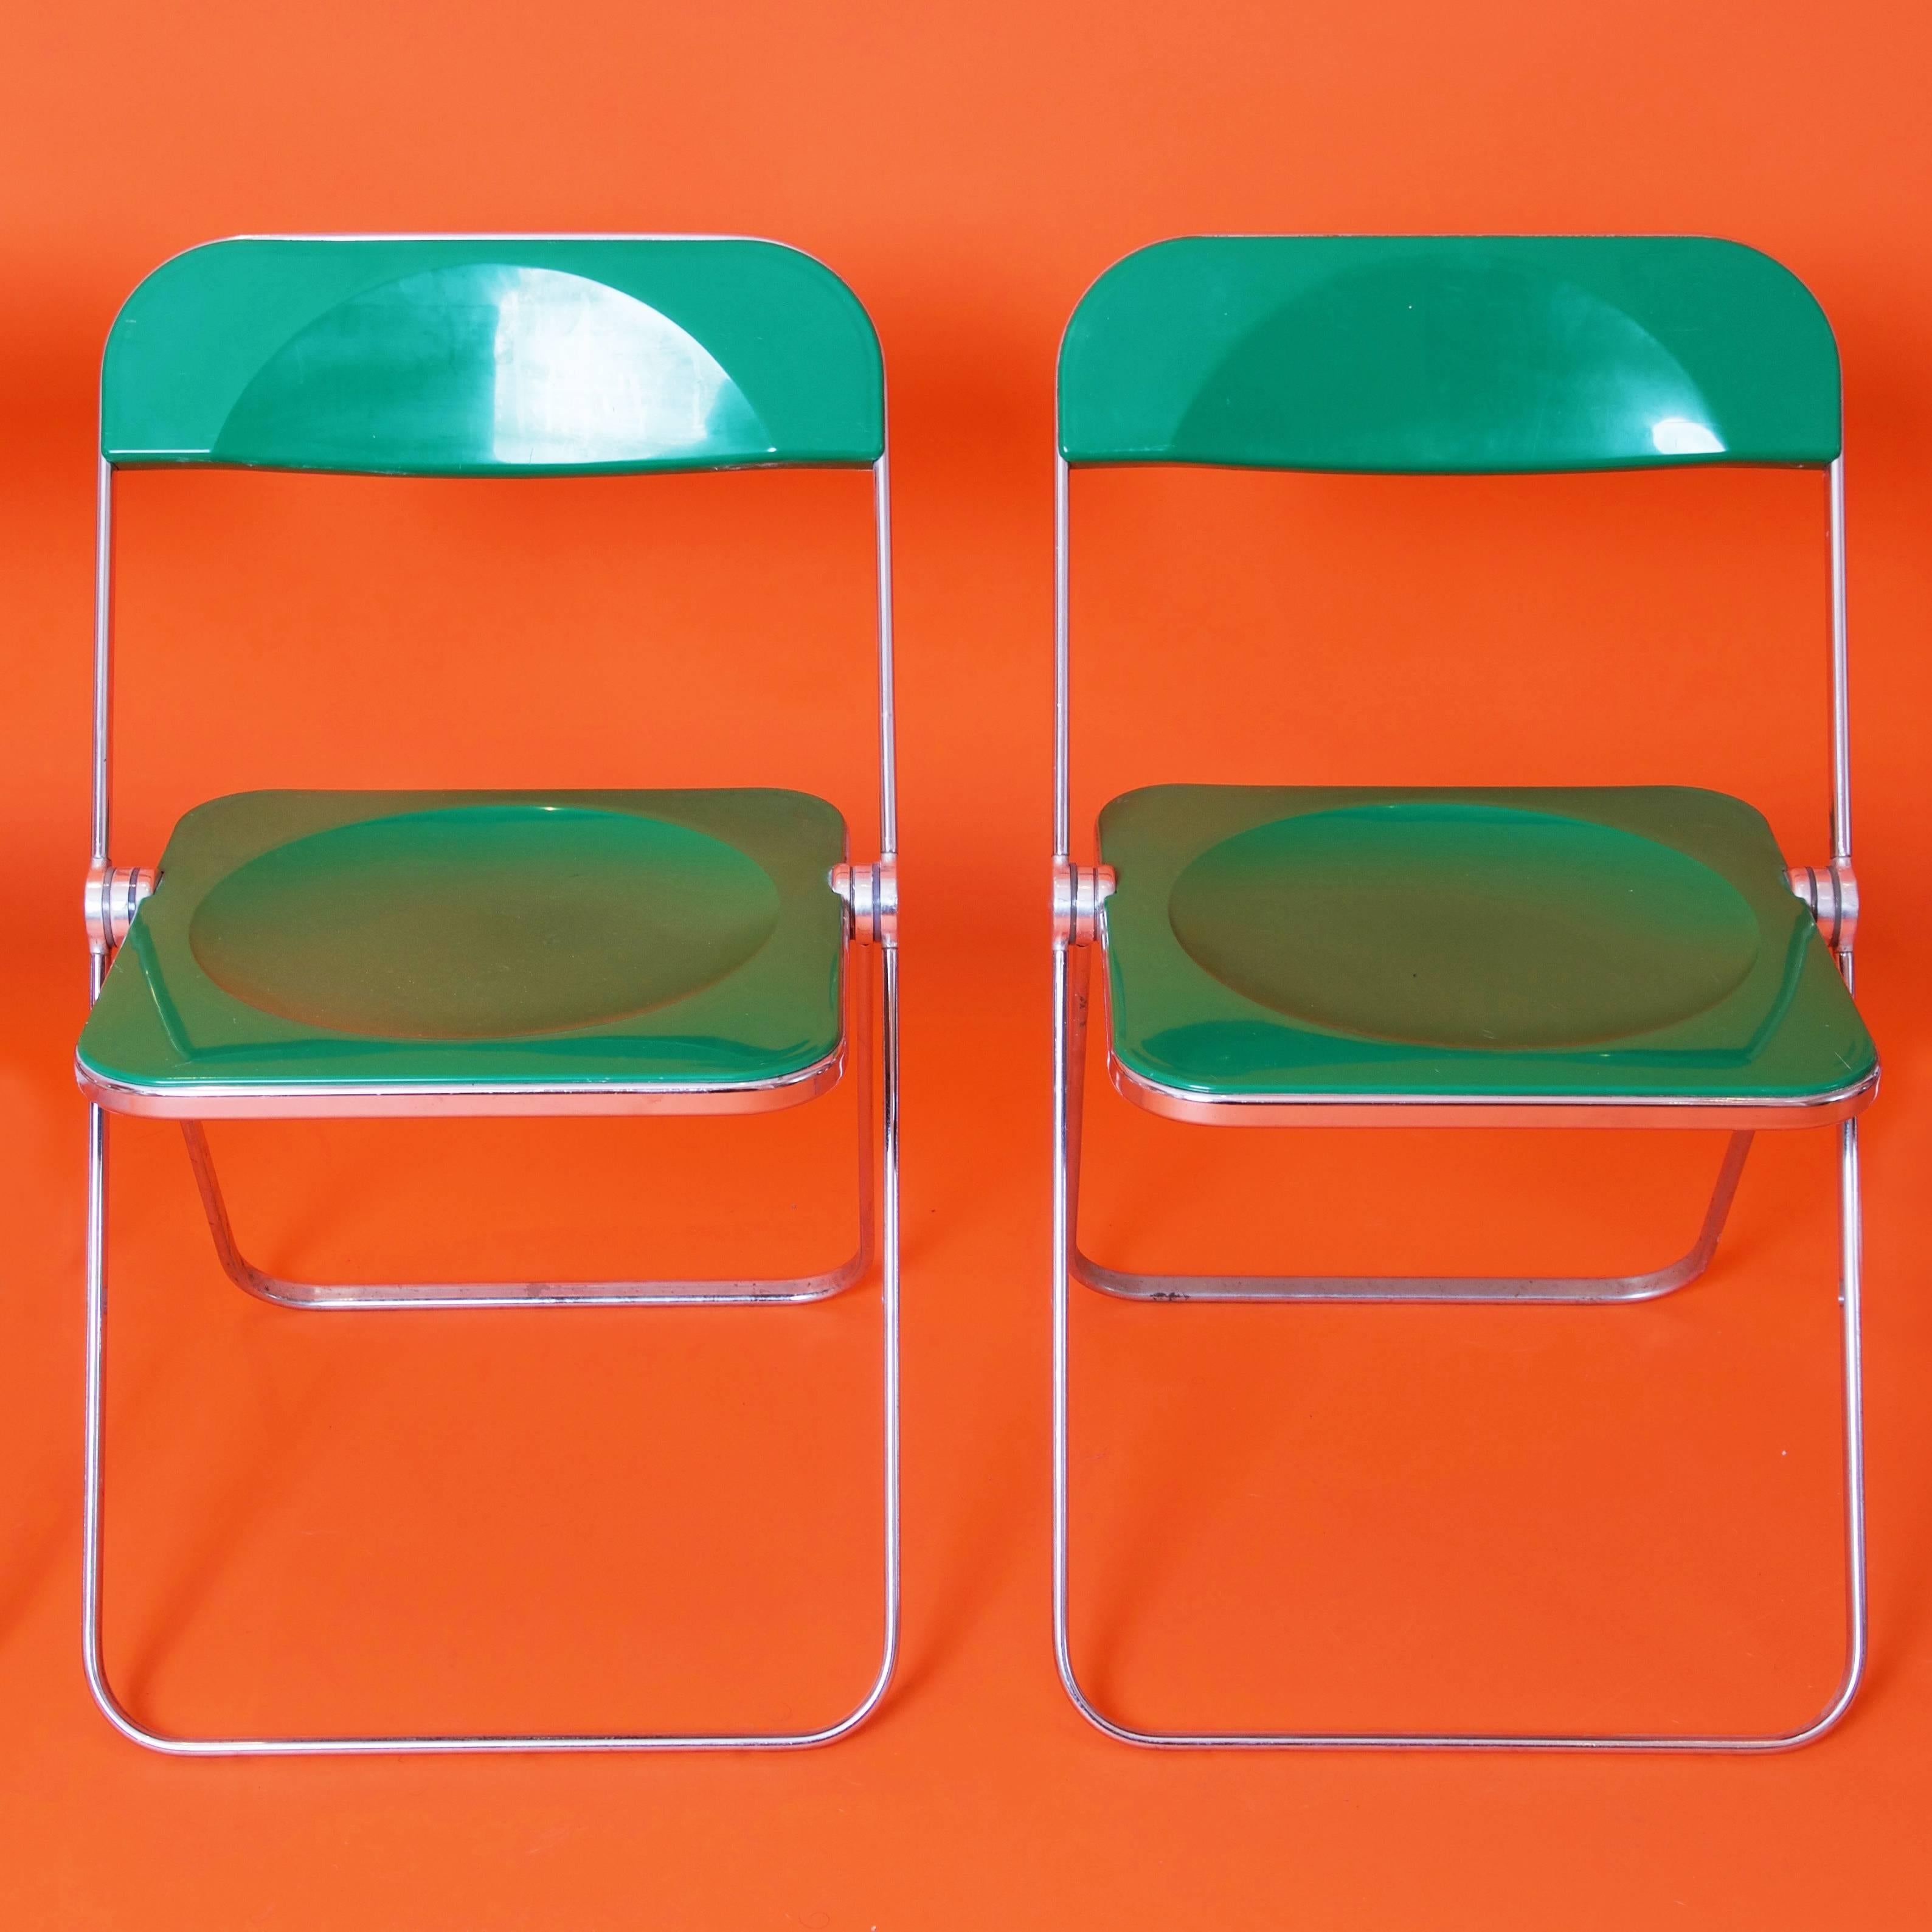 Rare pair of plia folding chairs designed by Giancarlo Piretti for Castelli in 1969. 
The seat is made of chrome frame with green ABS seating and back.
The chairs come in good original condition.